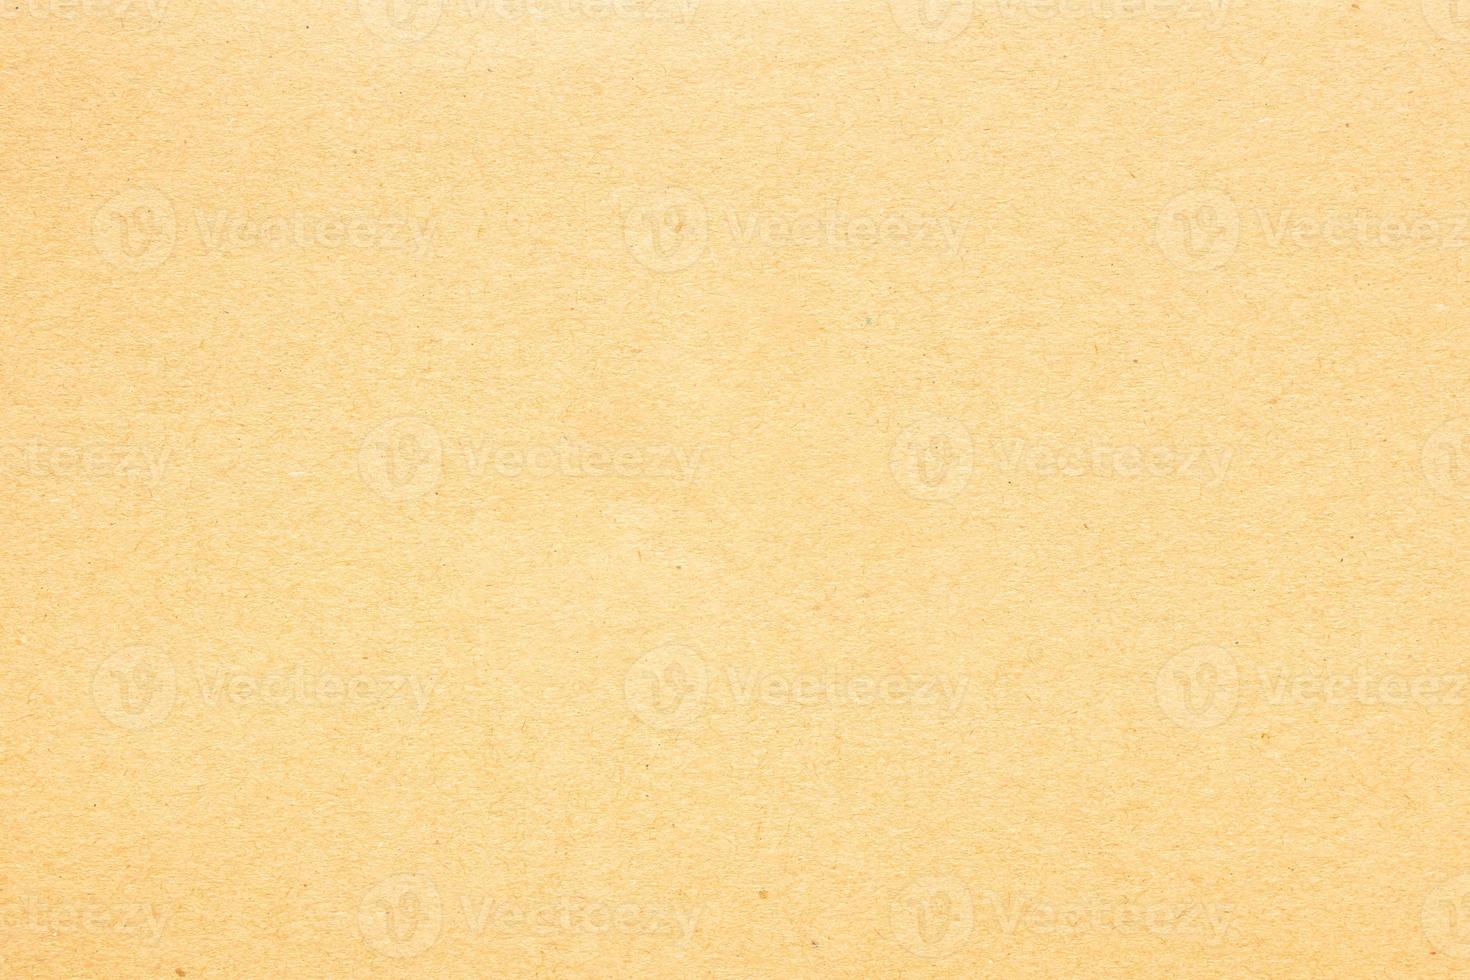 Recycled craft paper texture. Brown cardboard sheet paper